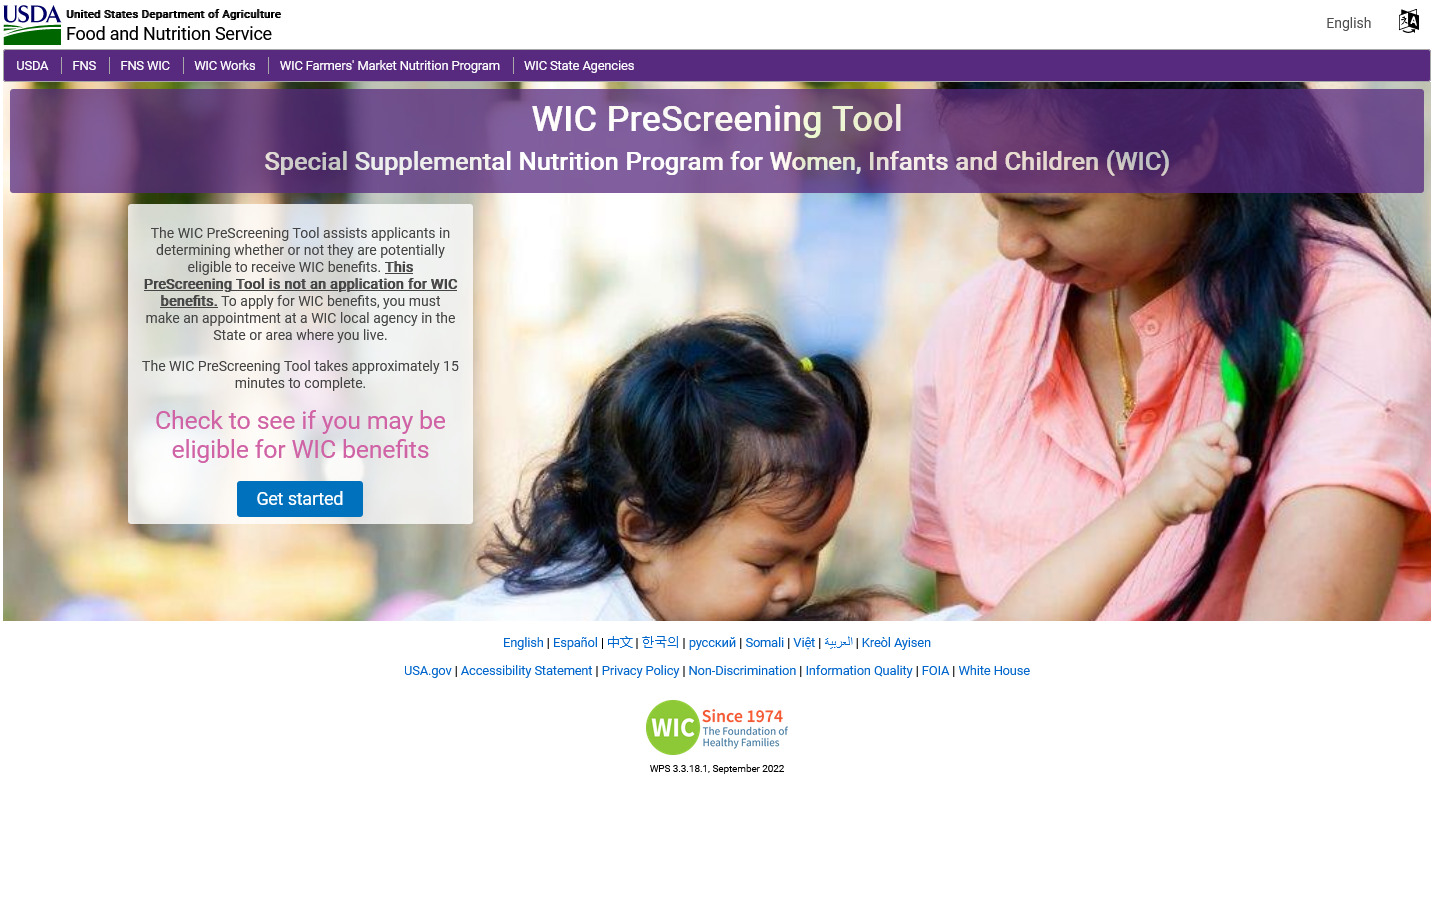 Pages - wic-benefits